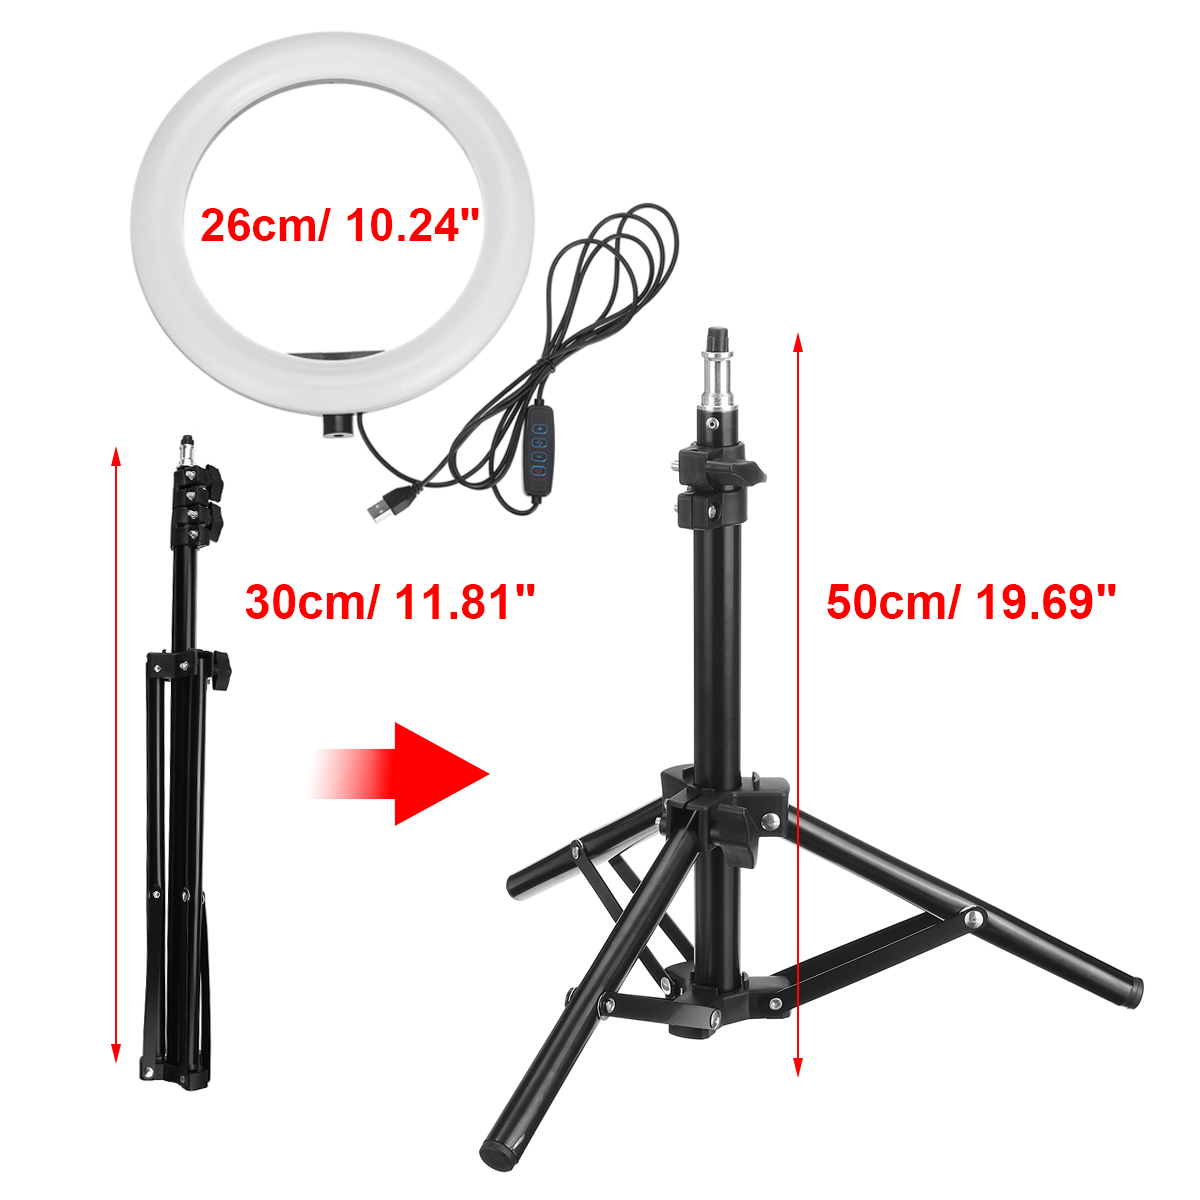 Flashes-Selfie-Lights-LED-Ring-Light-Lamp-Stand-Kit-Dimmable-Photo-Studio-Selfie-Makeup-Lamp-1760877-9